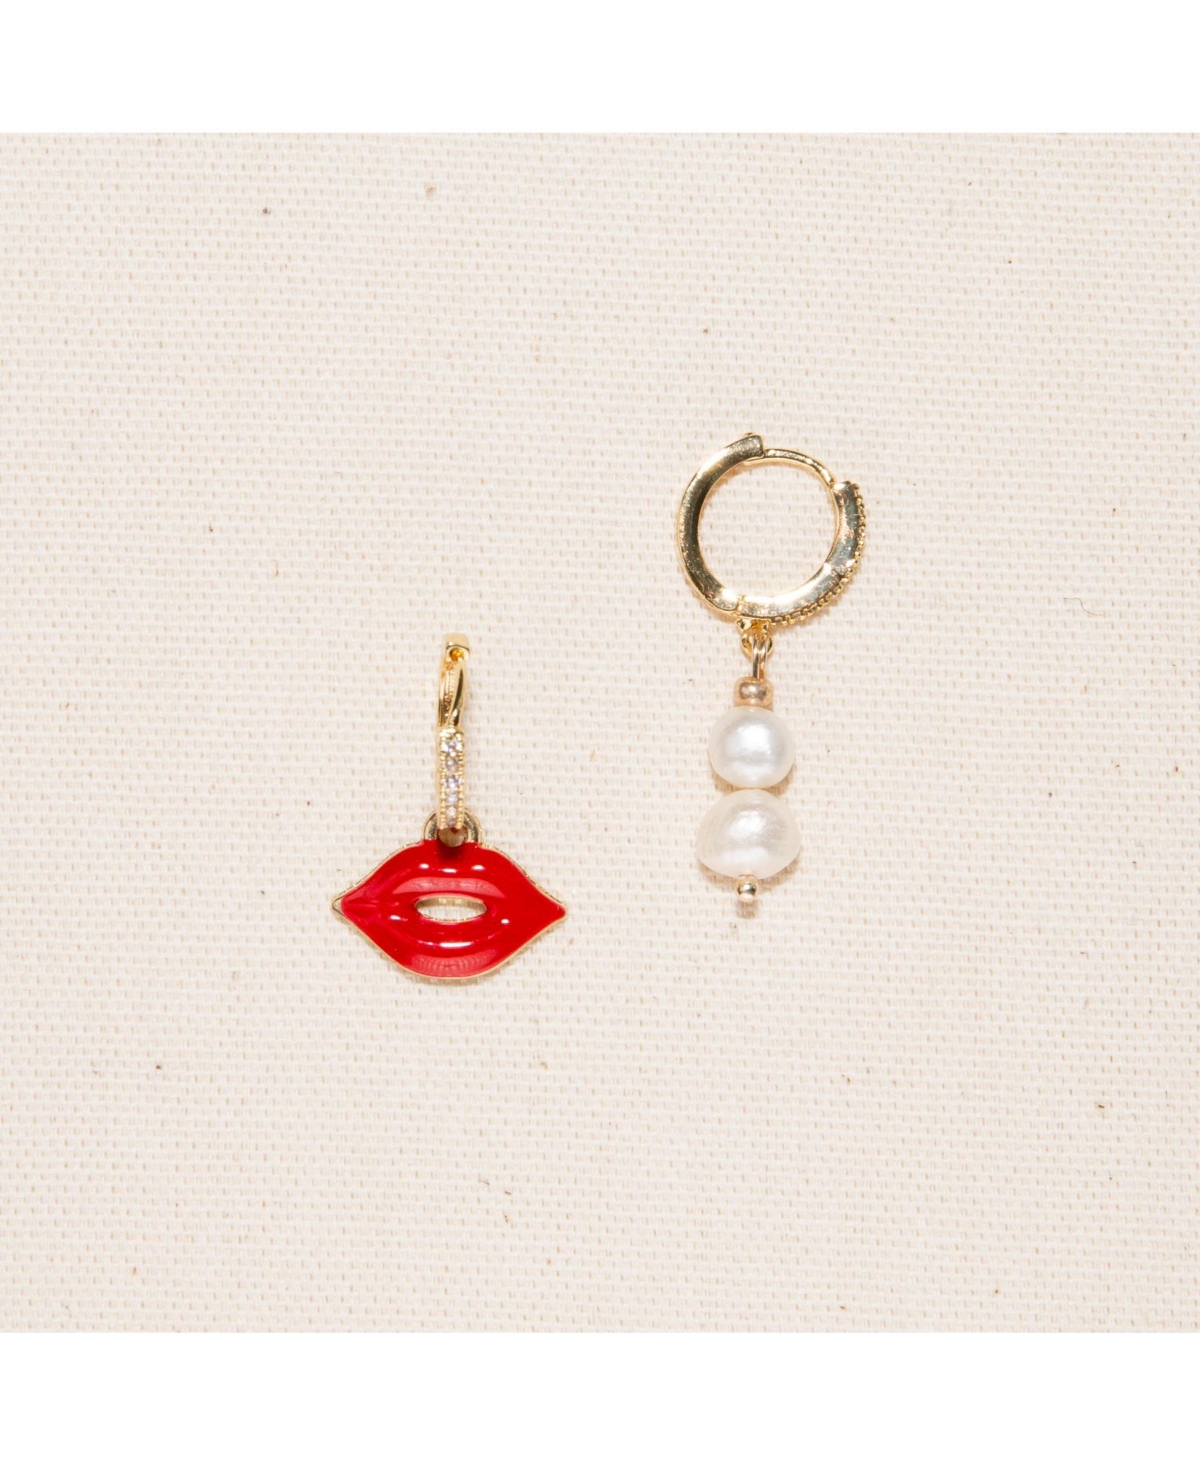 JOEY BABY 18K GOLD PLATED HUGGIES FRESHWATER PEARLS WITH A RED ENAMEL LIP CHARM